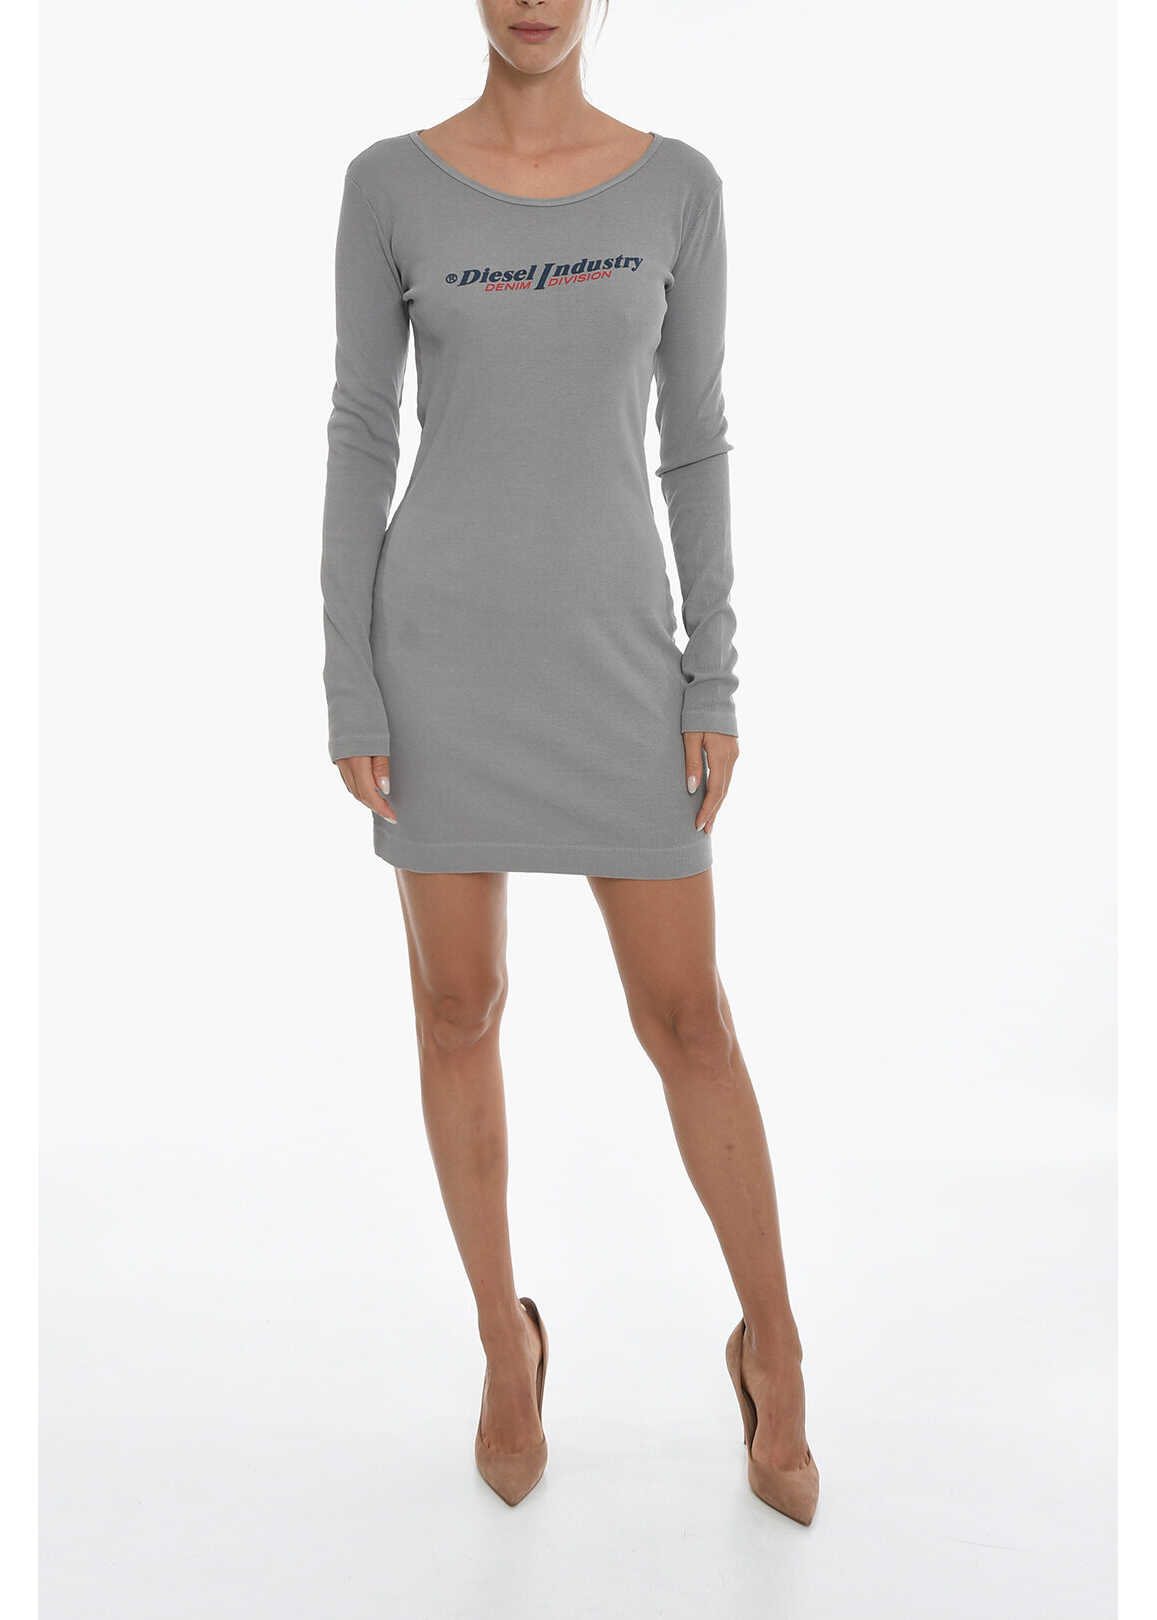 Diesel Red Tag Long Sleeve D-Tank-Ls-Ind Bodycon Dress Gray